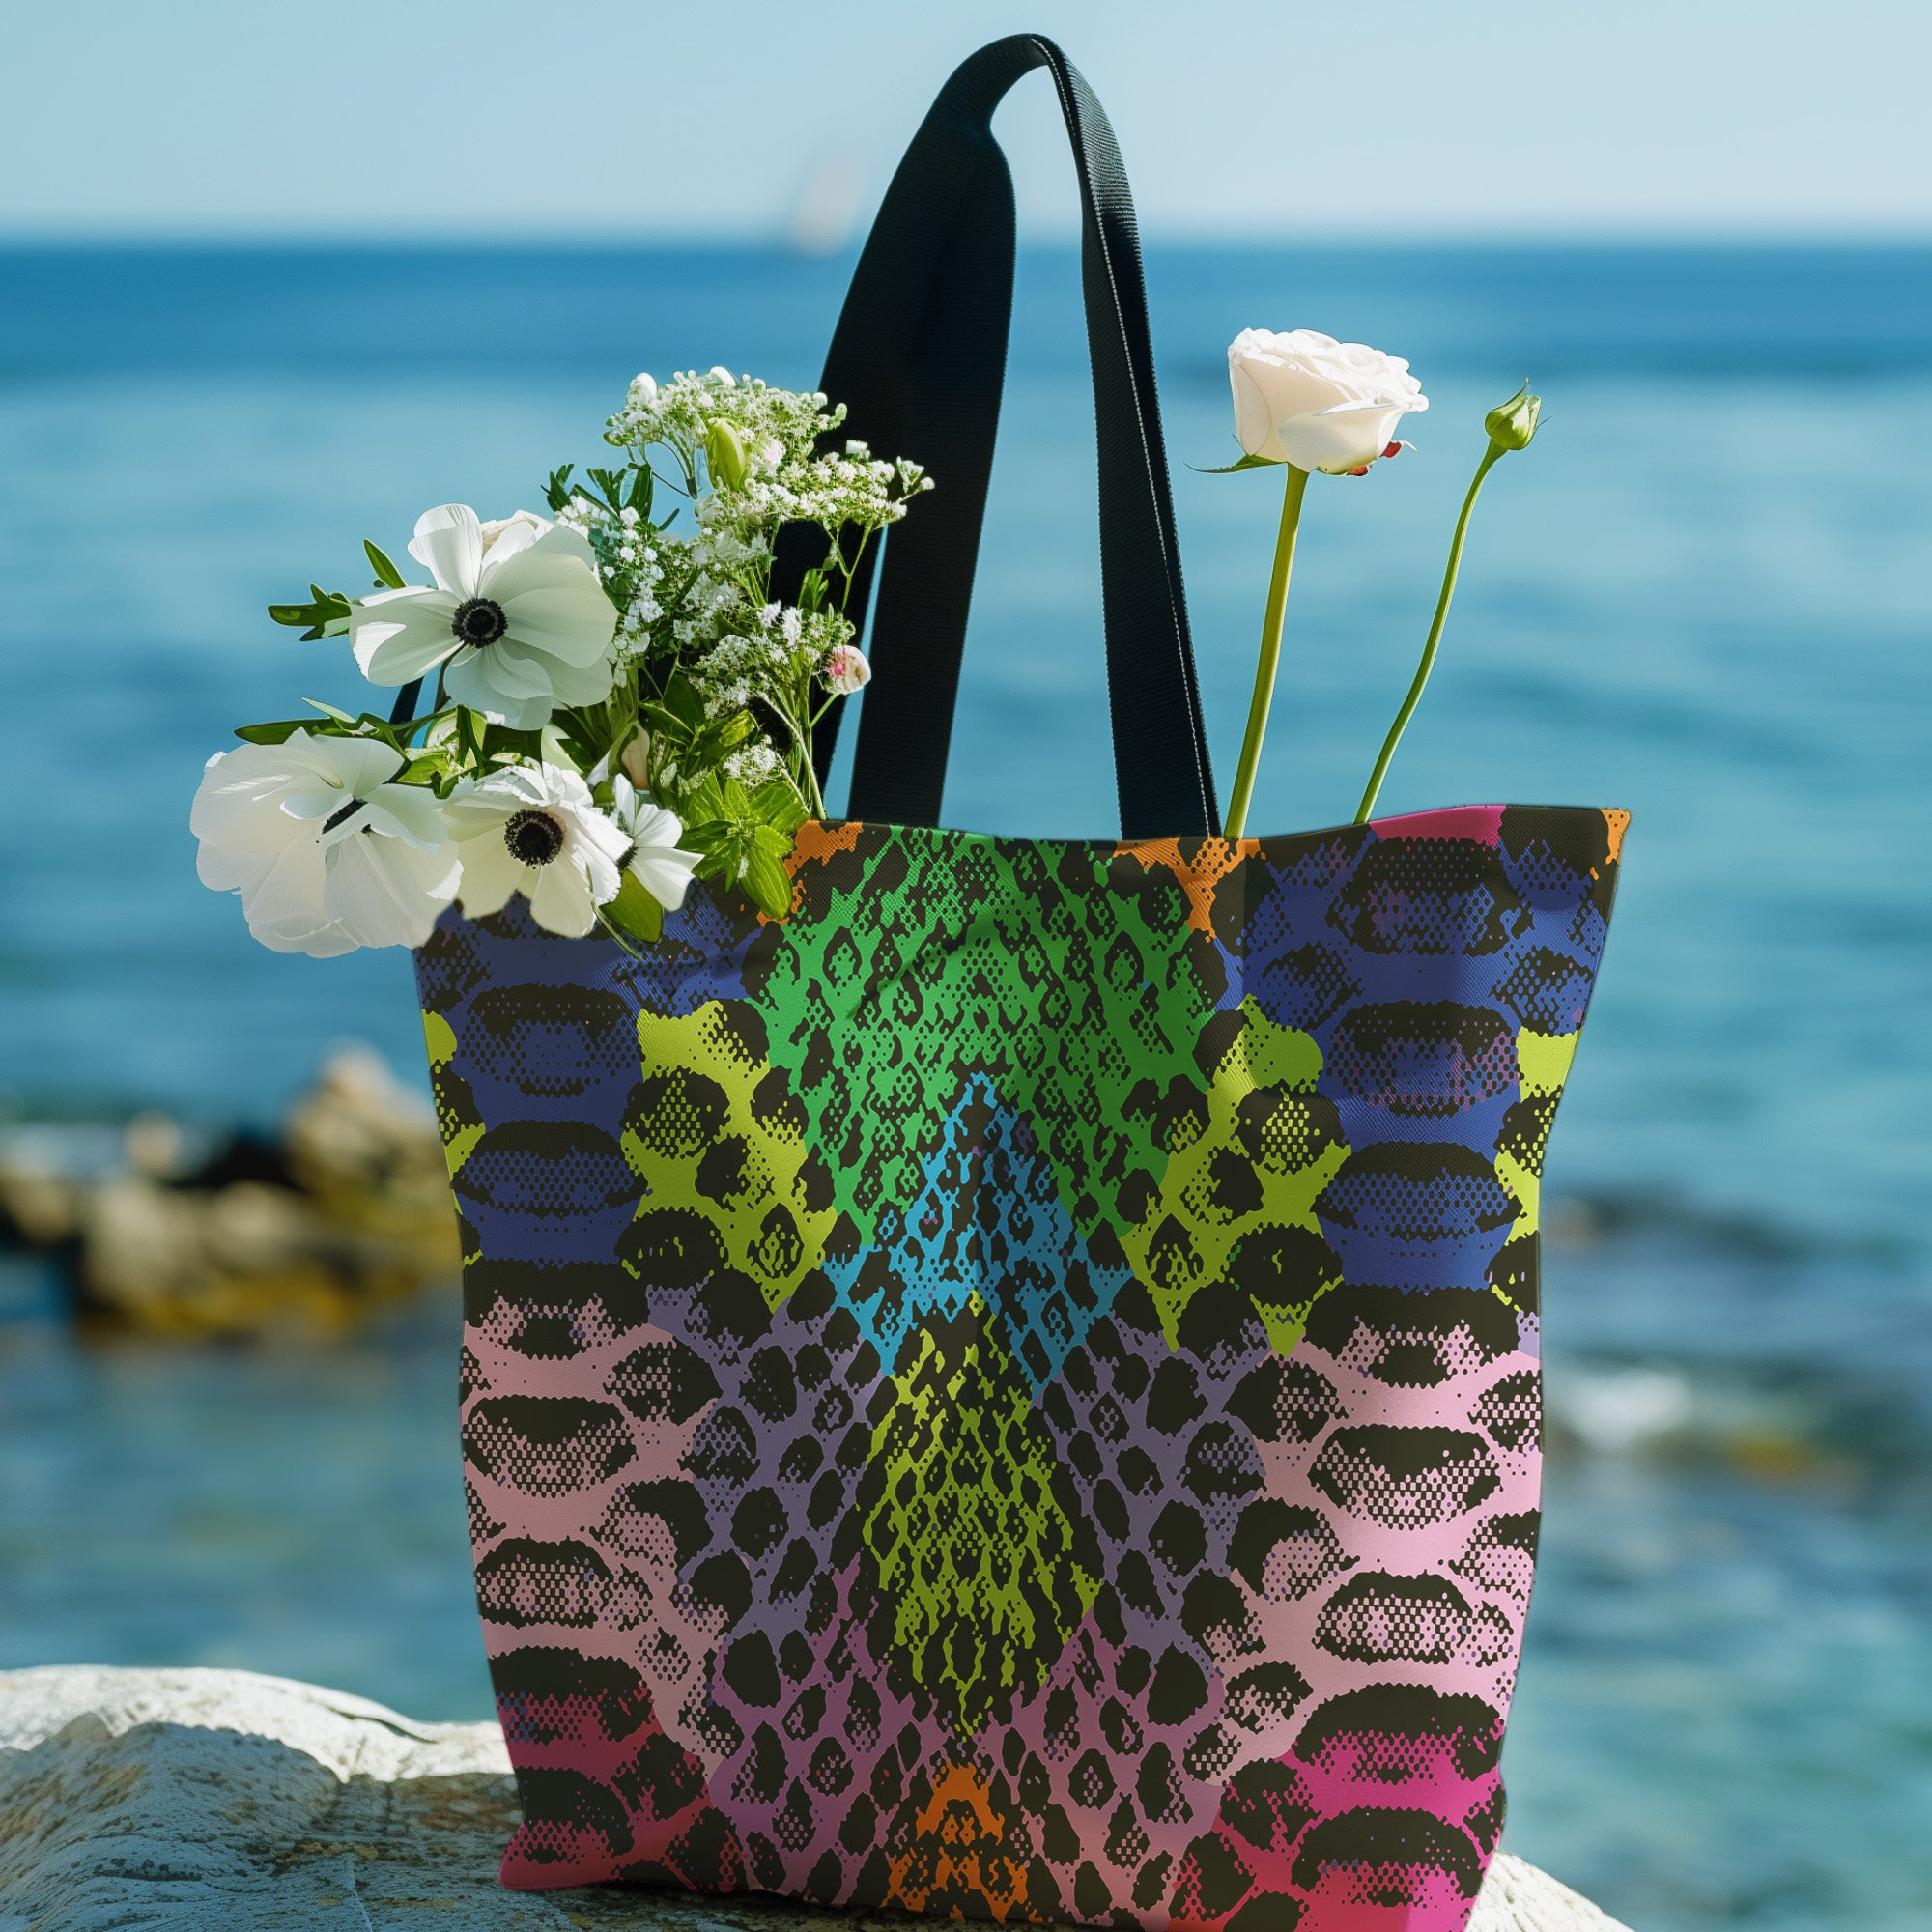 Snakeskin Carry All Tote in Rainbow